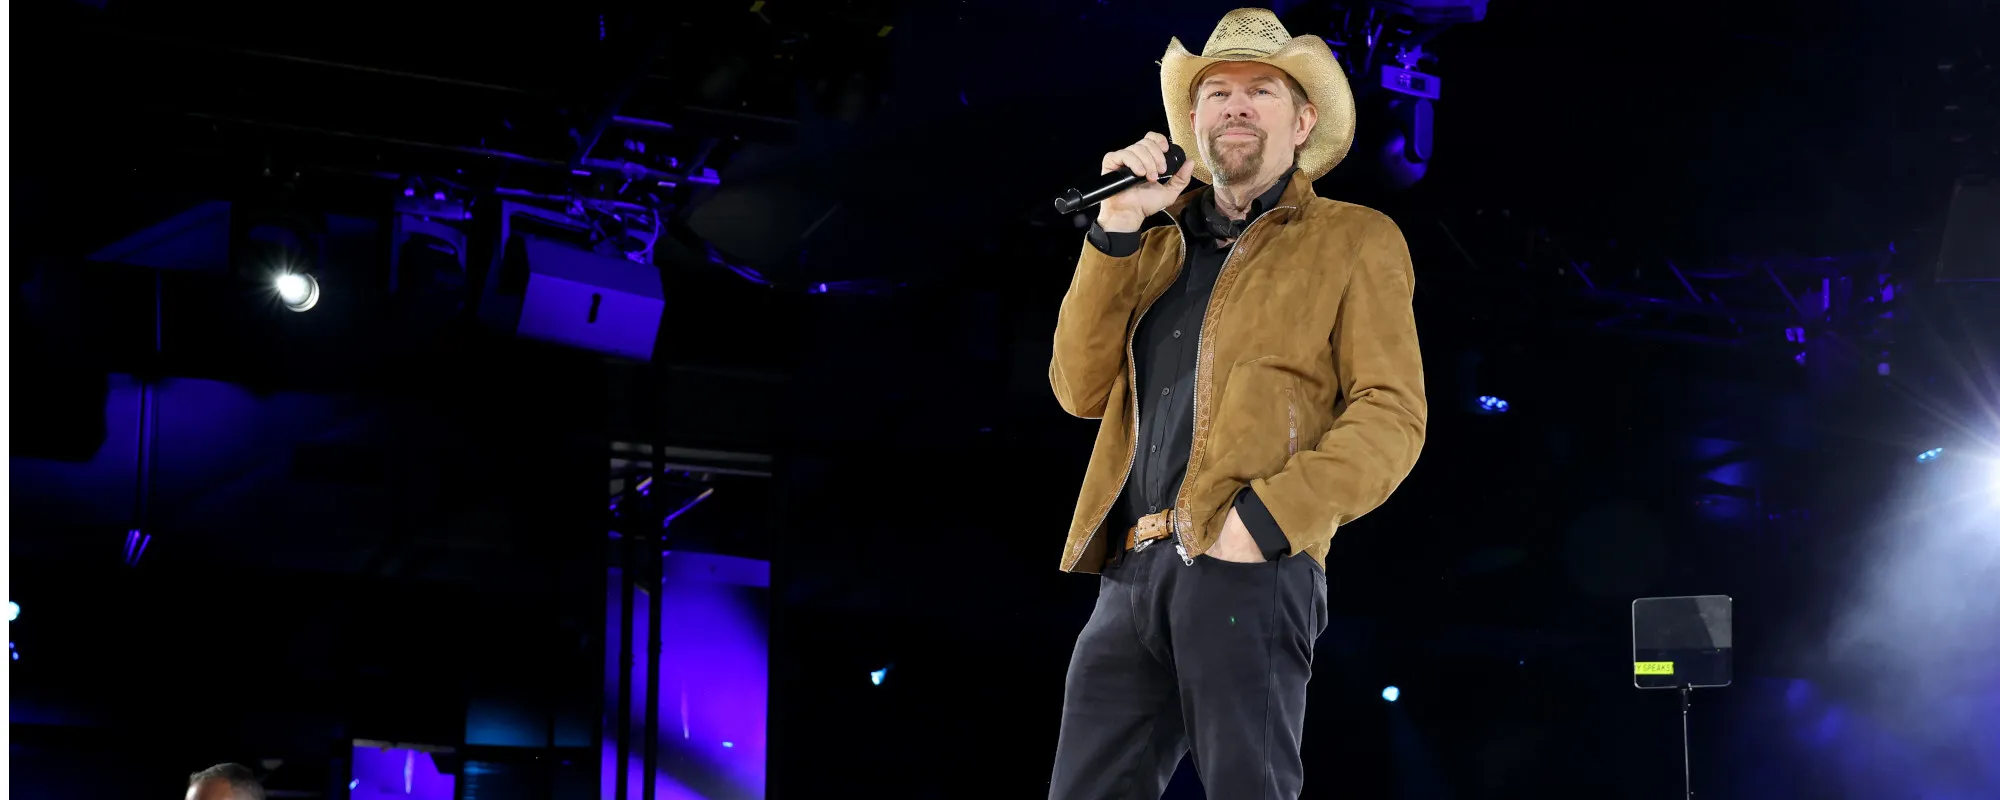 Toby Keith Shares Video on the Day of His Death of an Unforgettable Final Performance